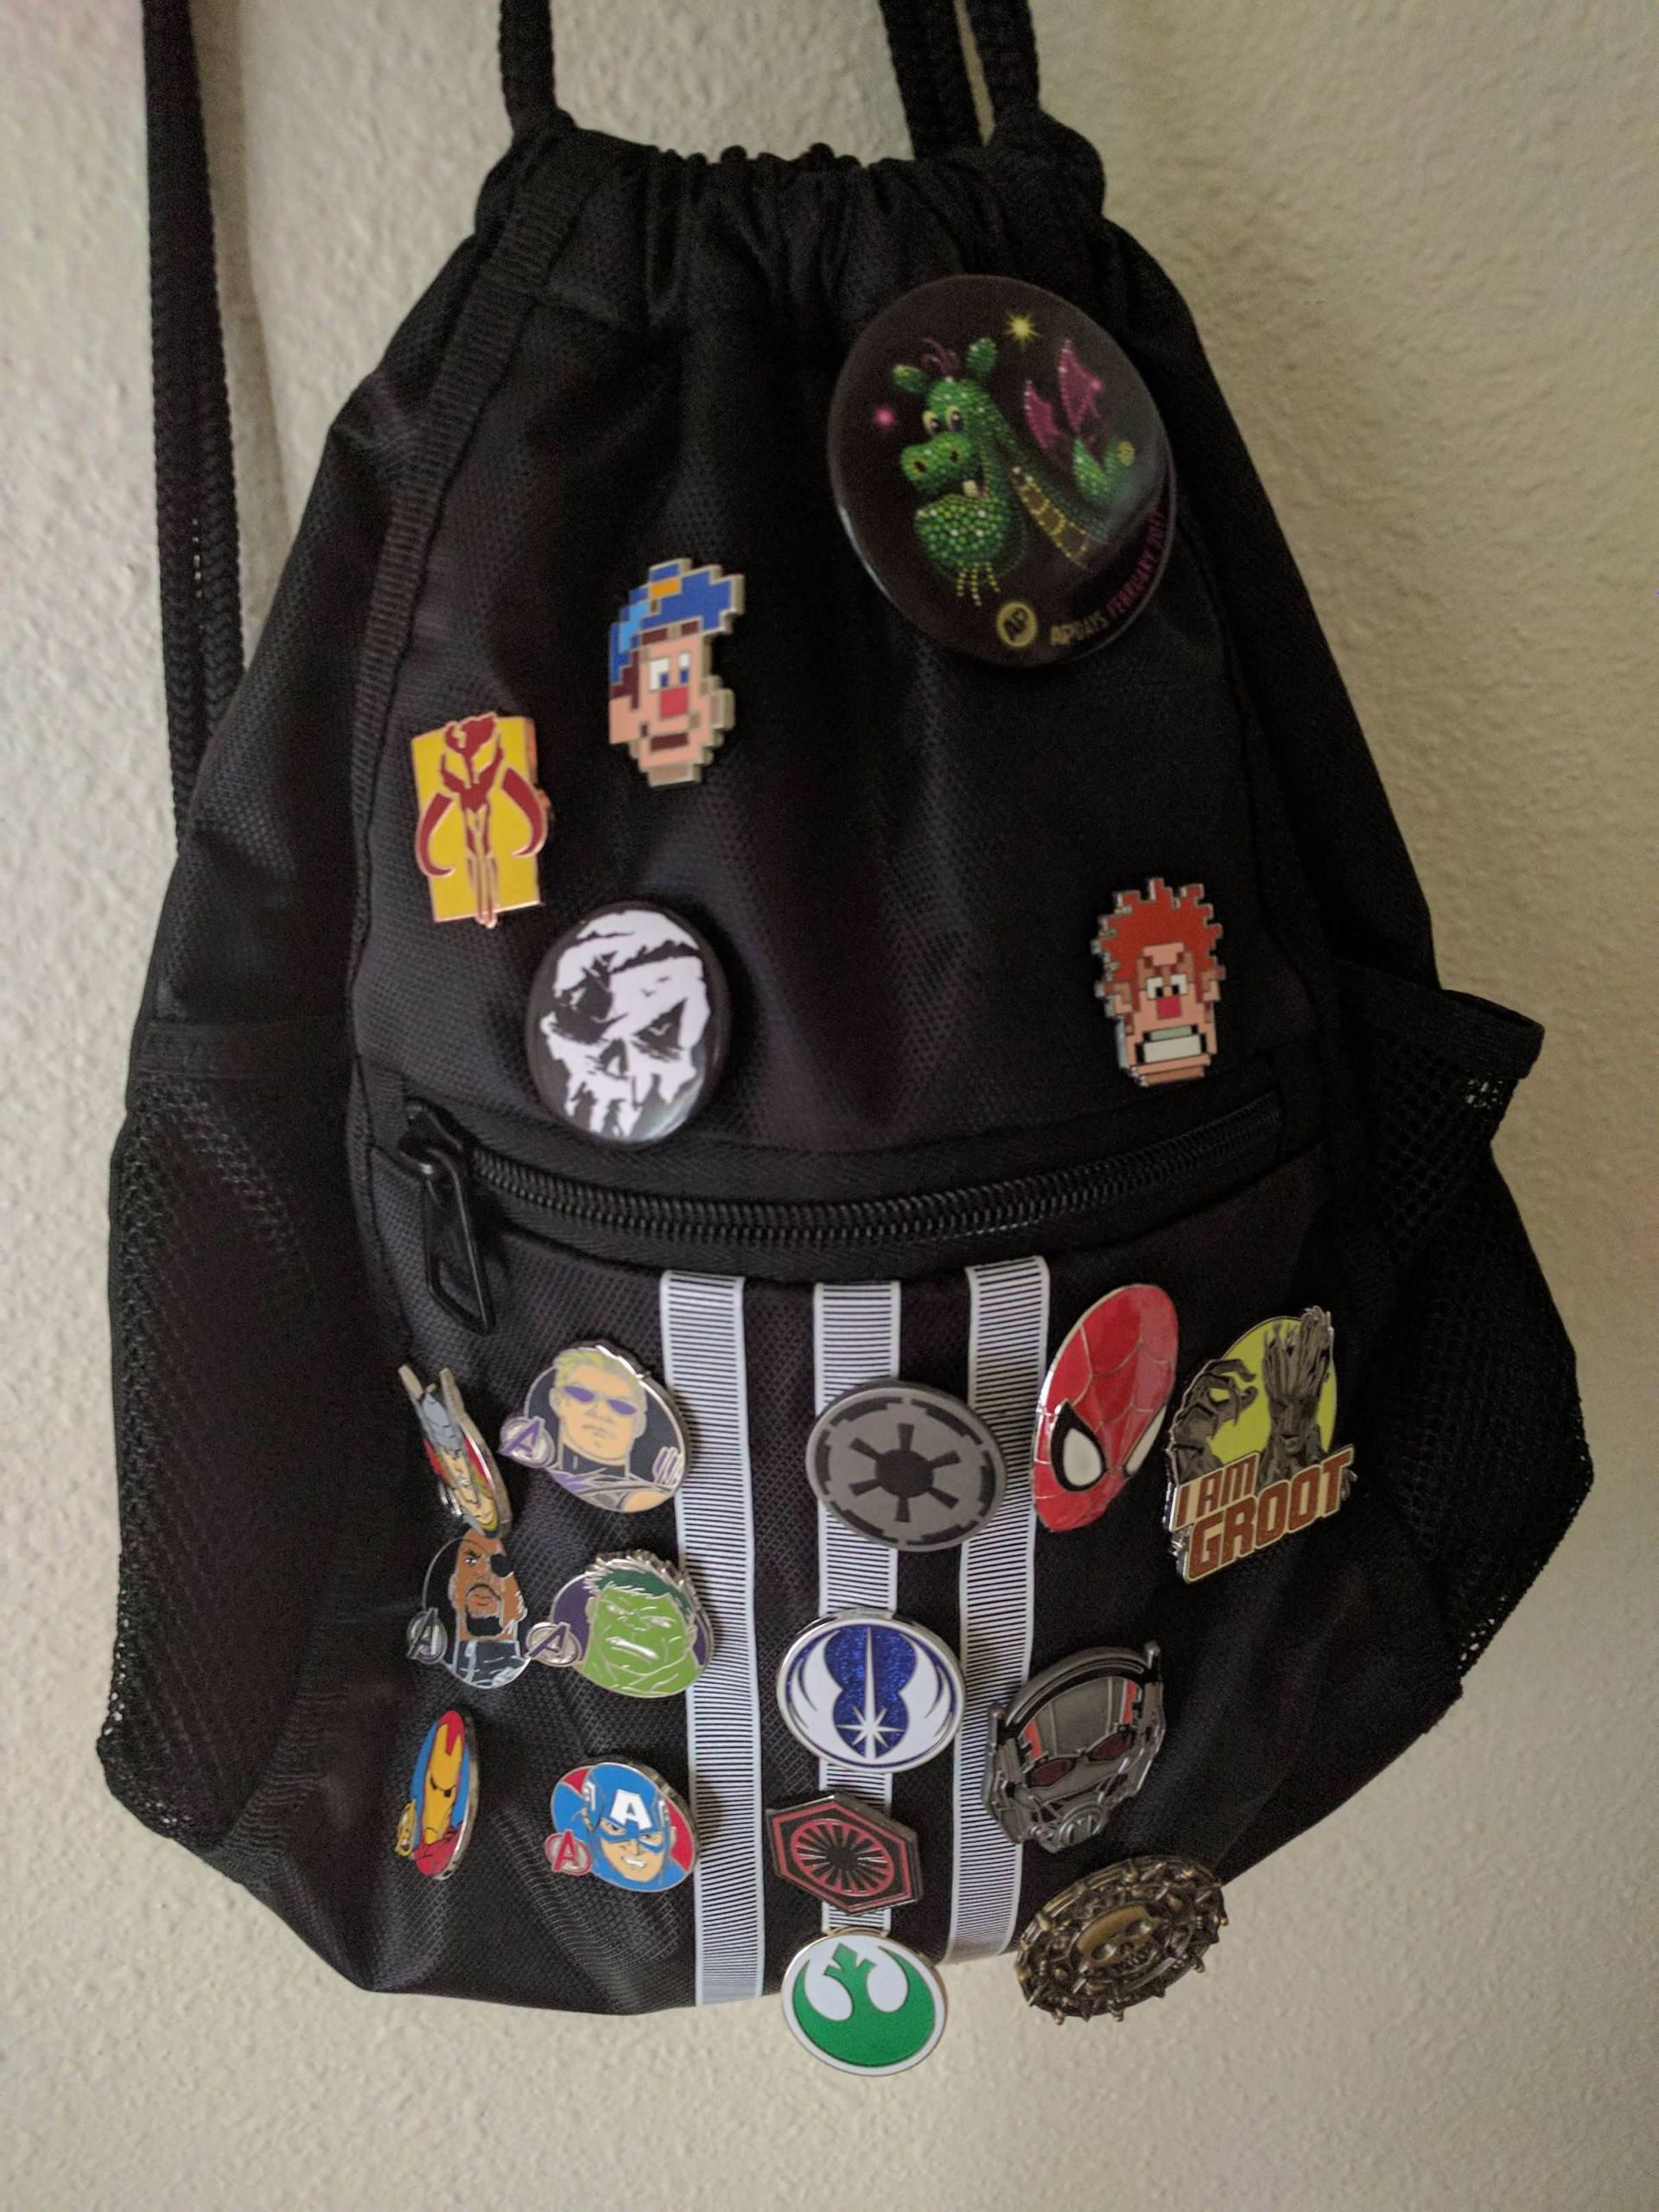 Pins On Backpack
 Is it safe to put pins on a backpack Disneyland